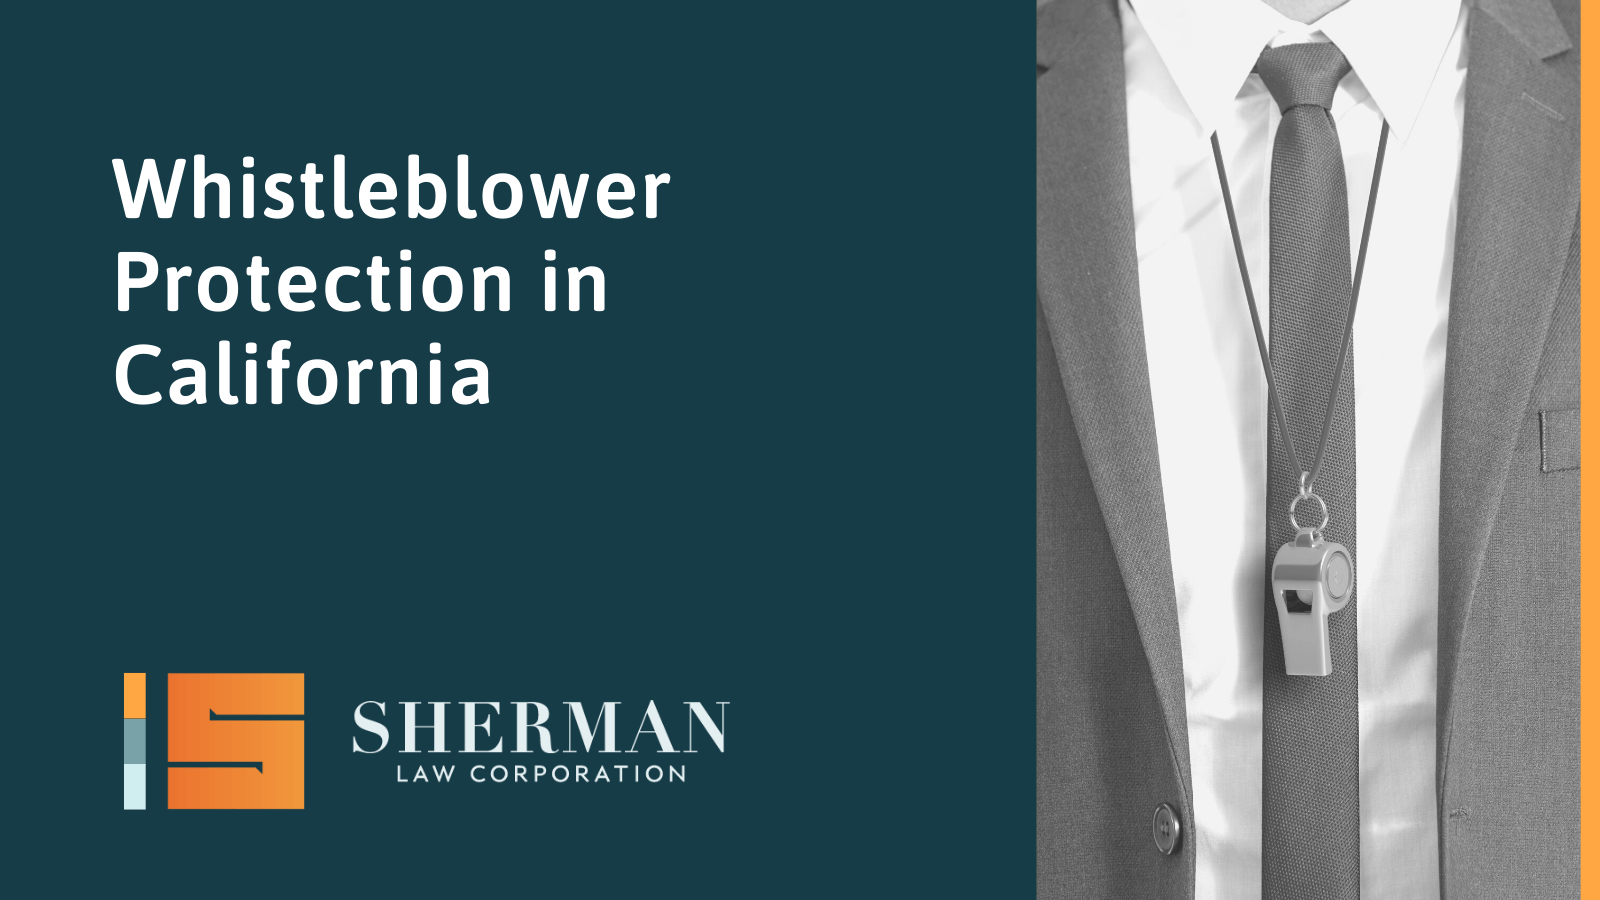 Whistleblower Protection in California- california employment lawyer - sherman law corporation